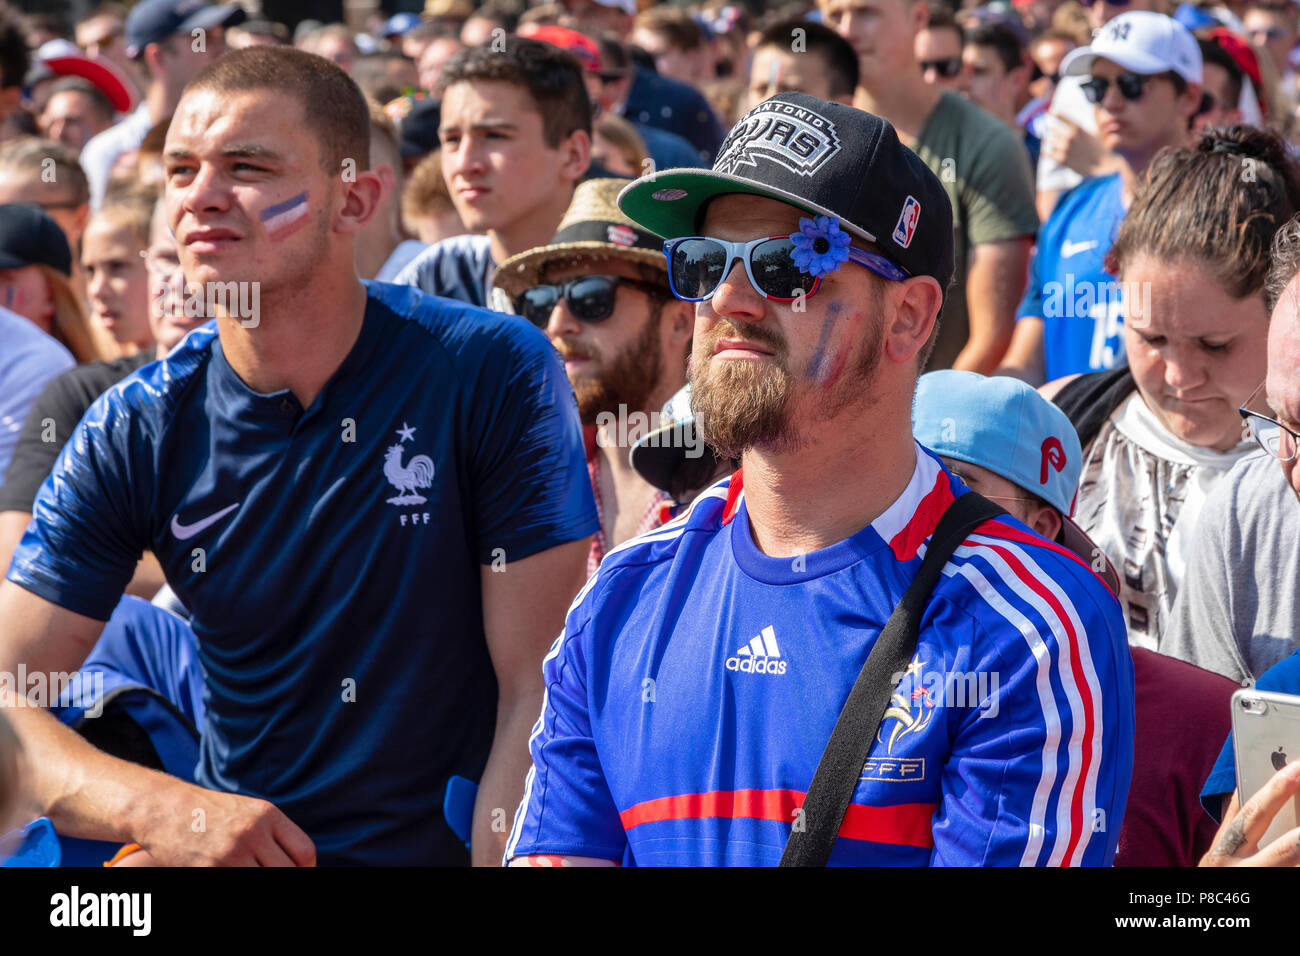 French football supporters cheering on the national team during the World Cup while watching the game on a huge public television screen Stock Photo